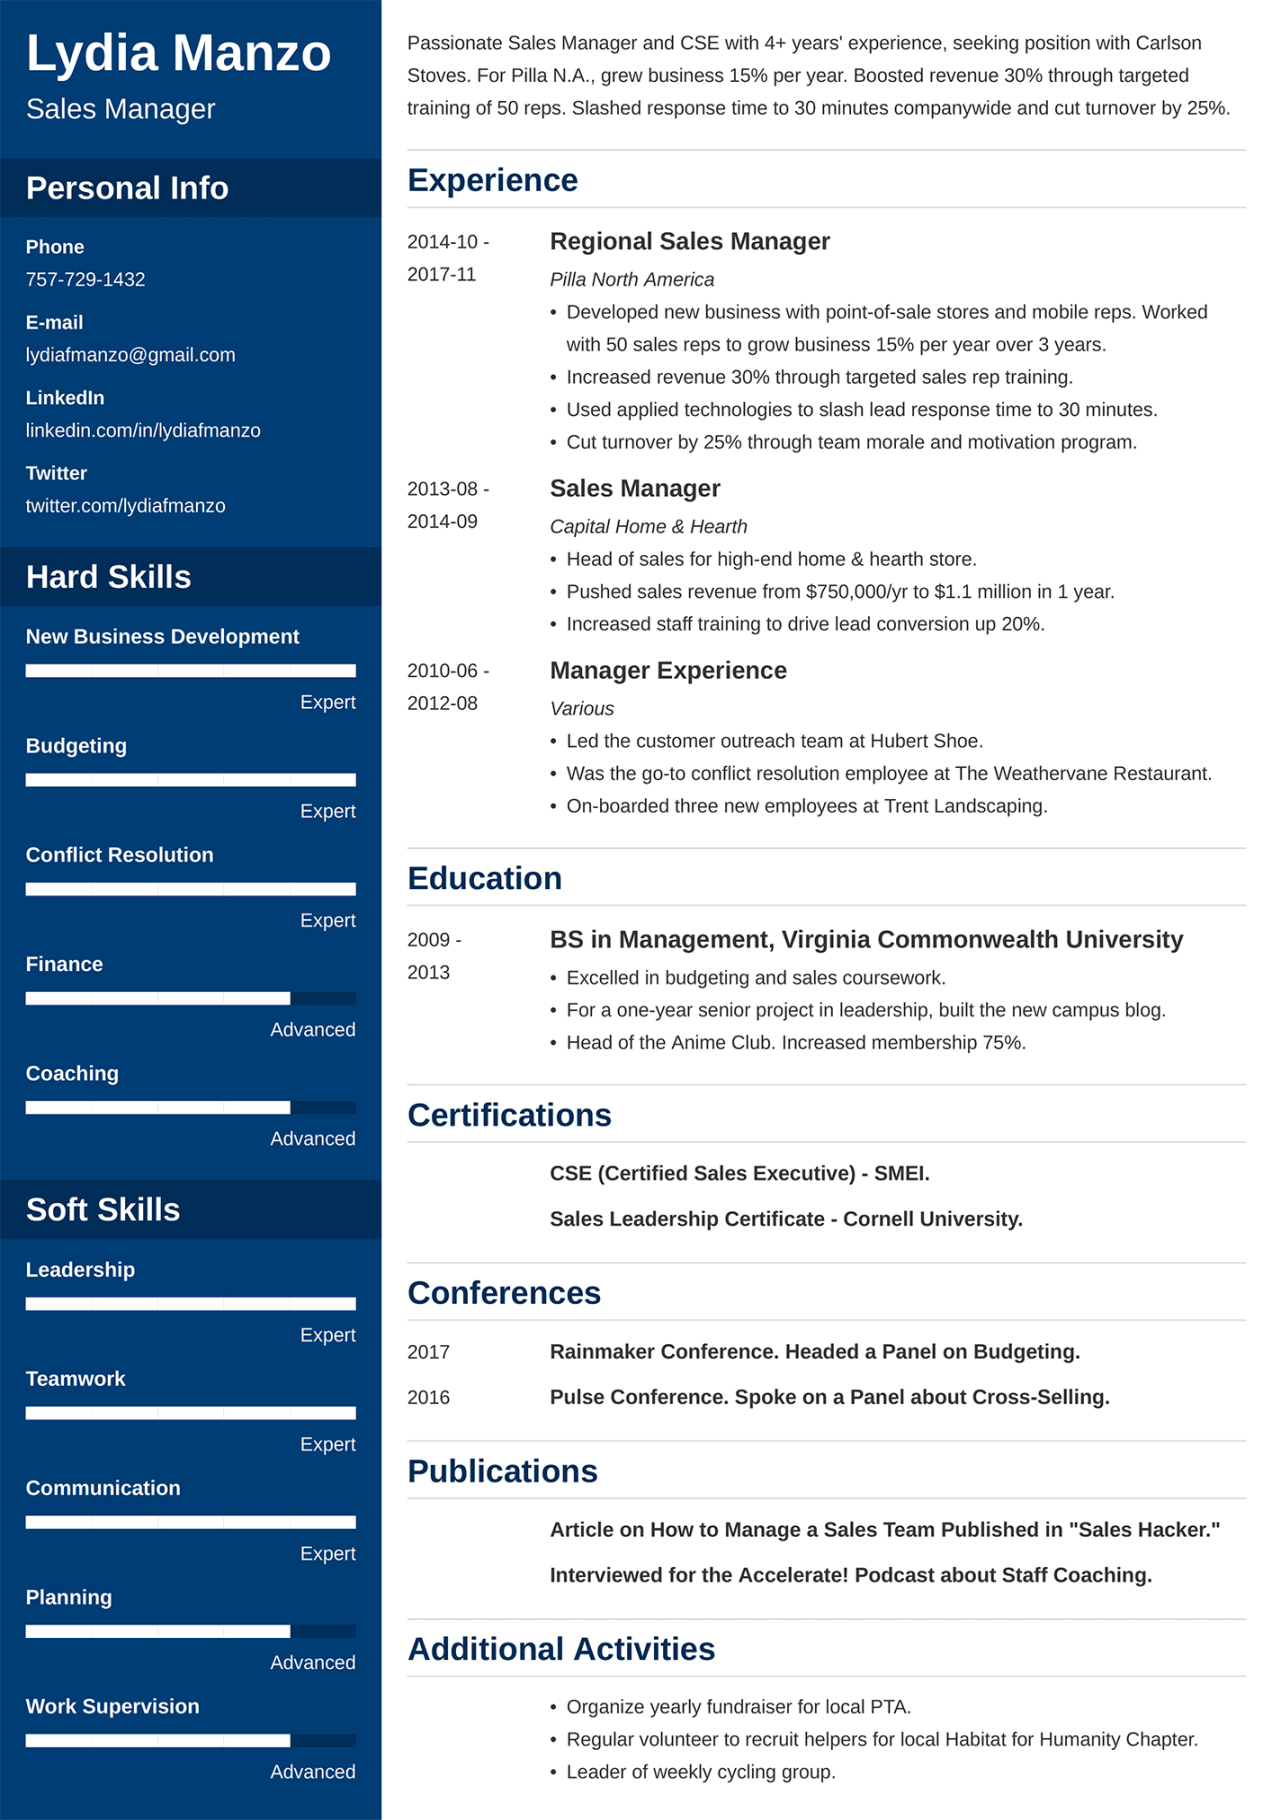 + Resume Examples & Writing Guides for Any Job in